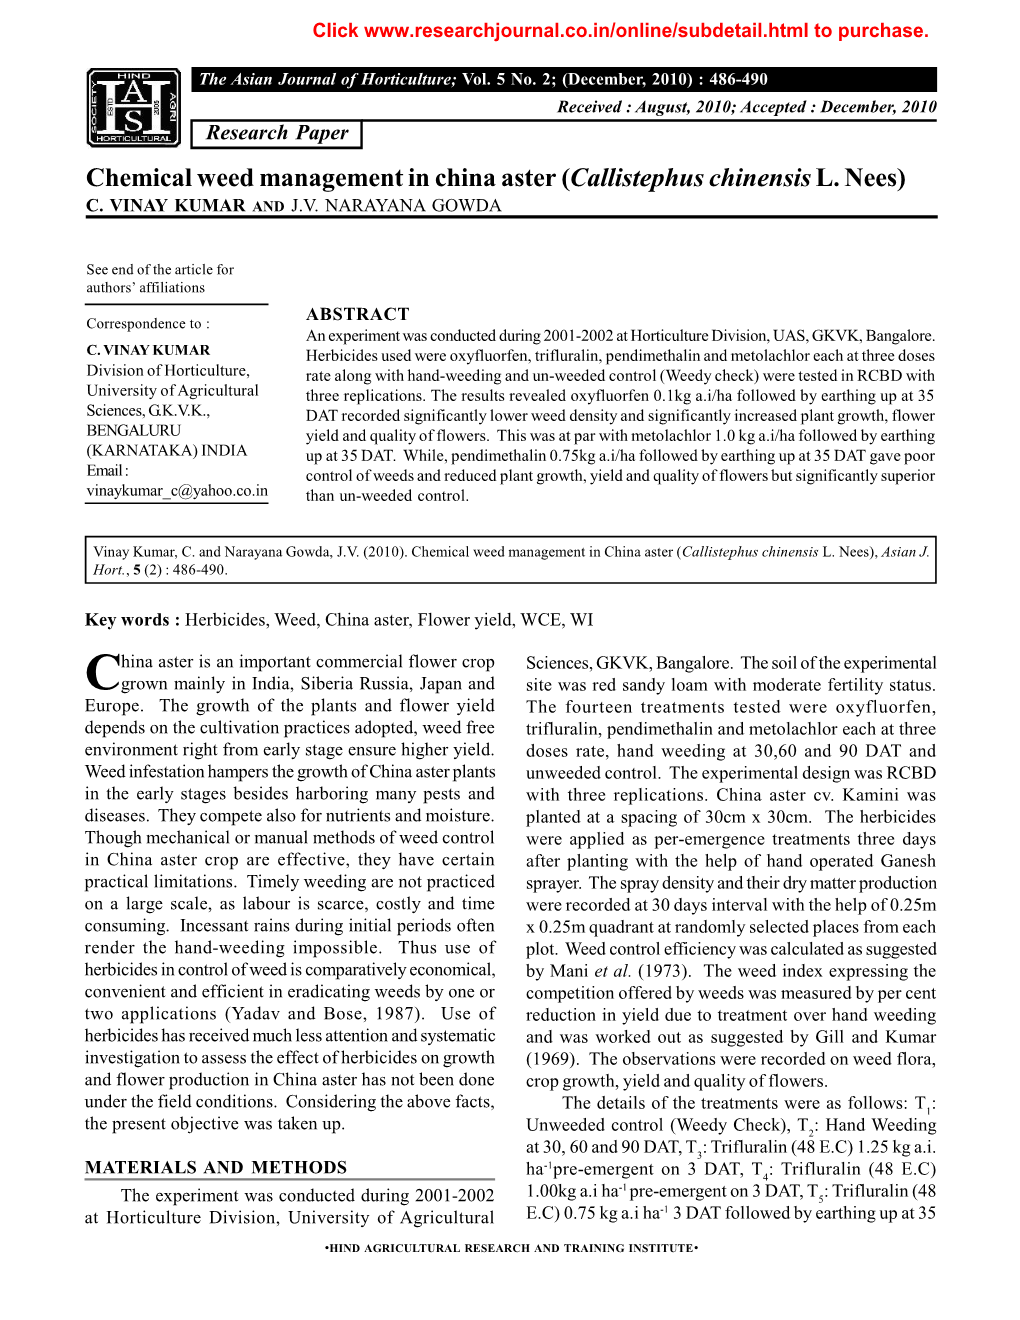 Chemical Weed Management in China Aster (Callistephus Chinensisl. Nees)